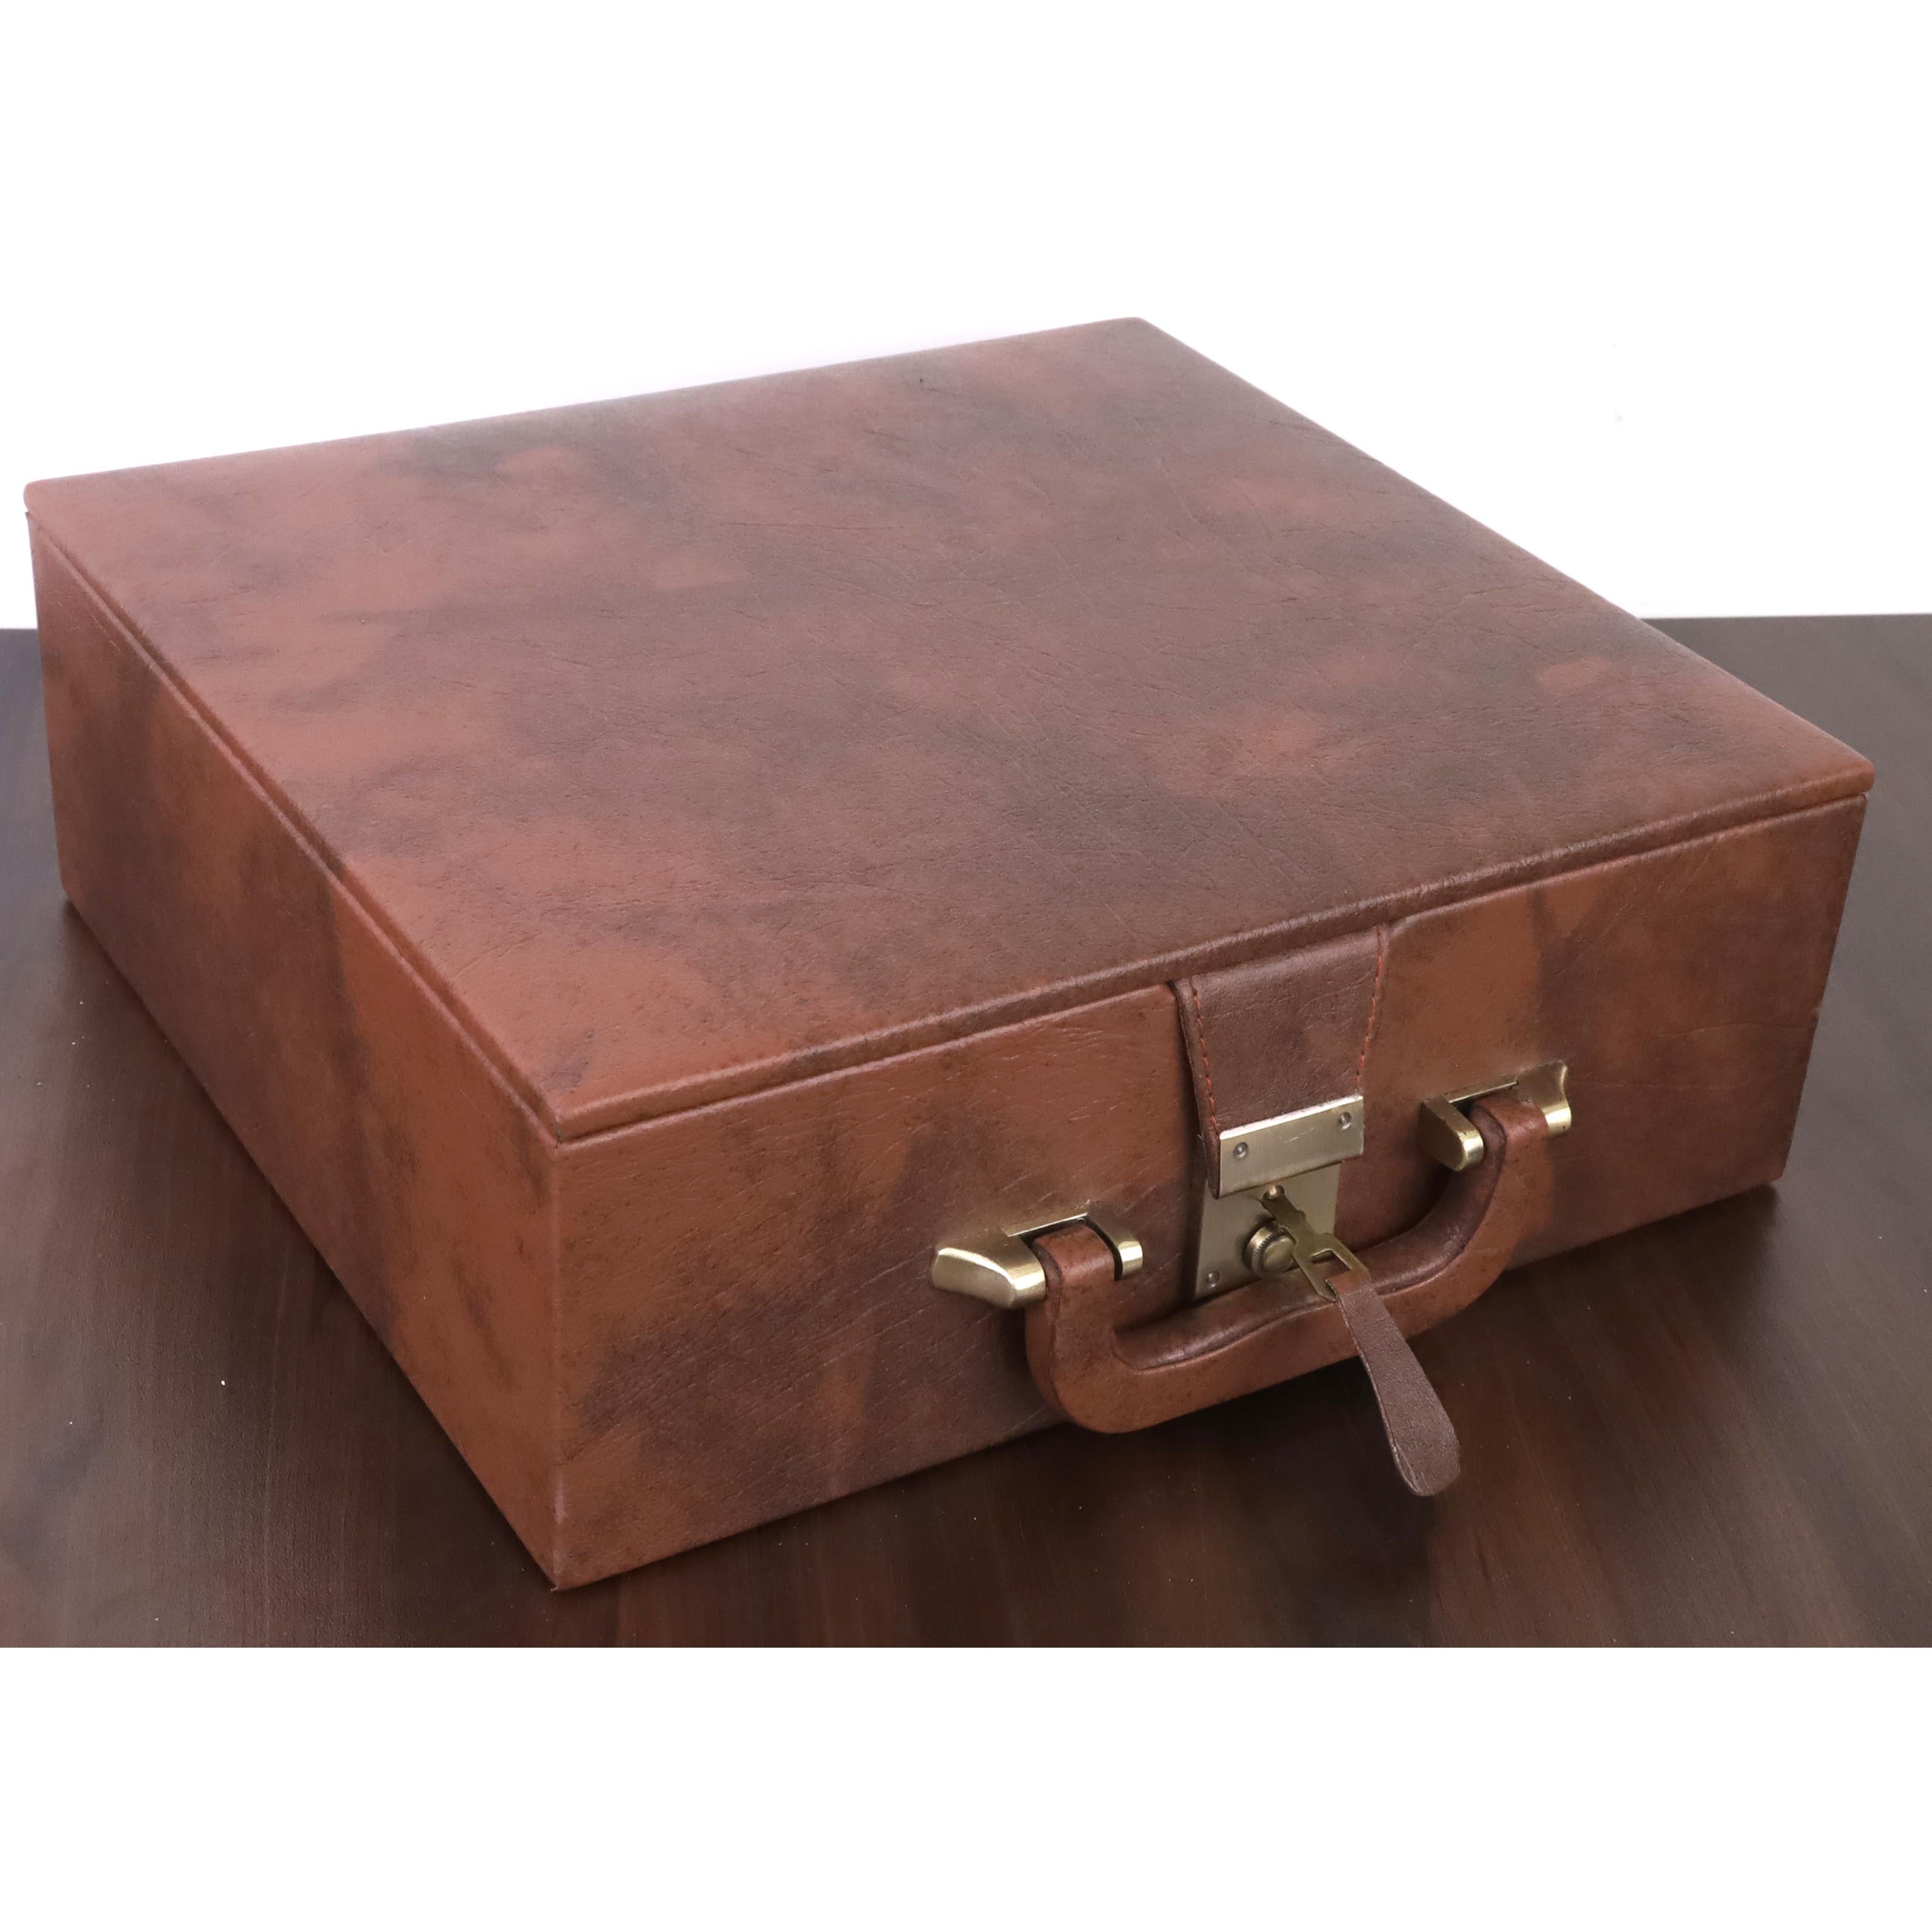 Tan Brown Leatherette Coffer Storage Box for Chess Pieces - 3.5" To 4.1" Chessmen - With Tray